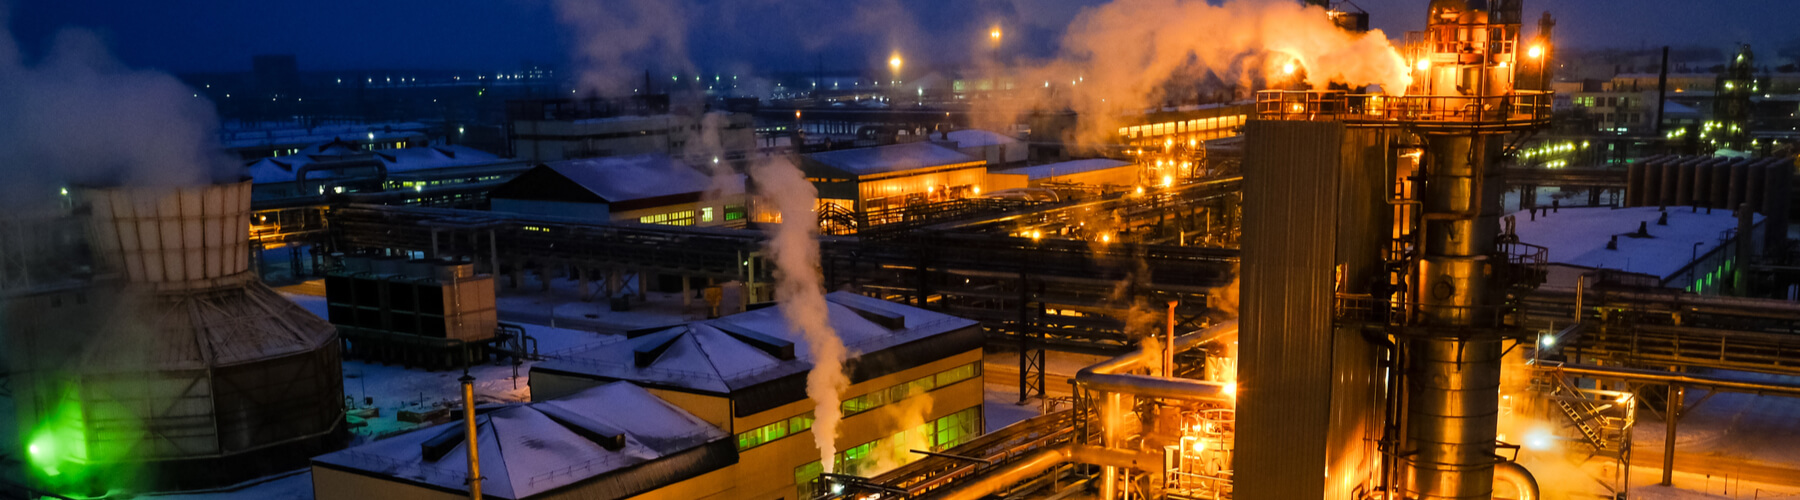 Industrial Plant for the production of ethylene, on a winter night